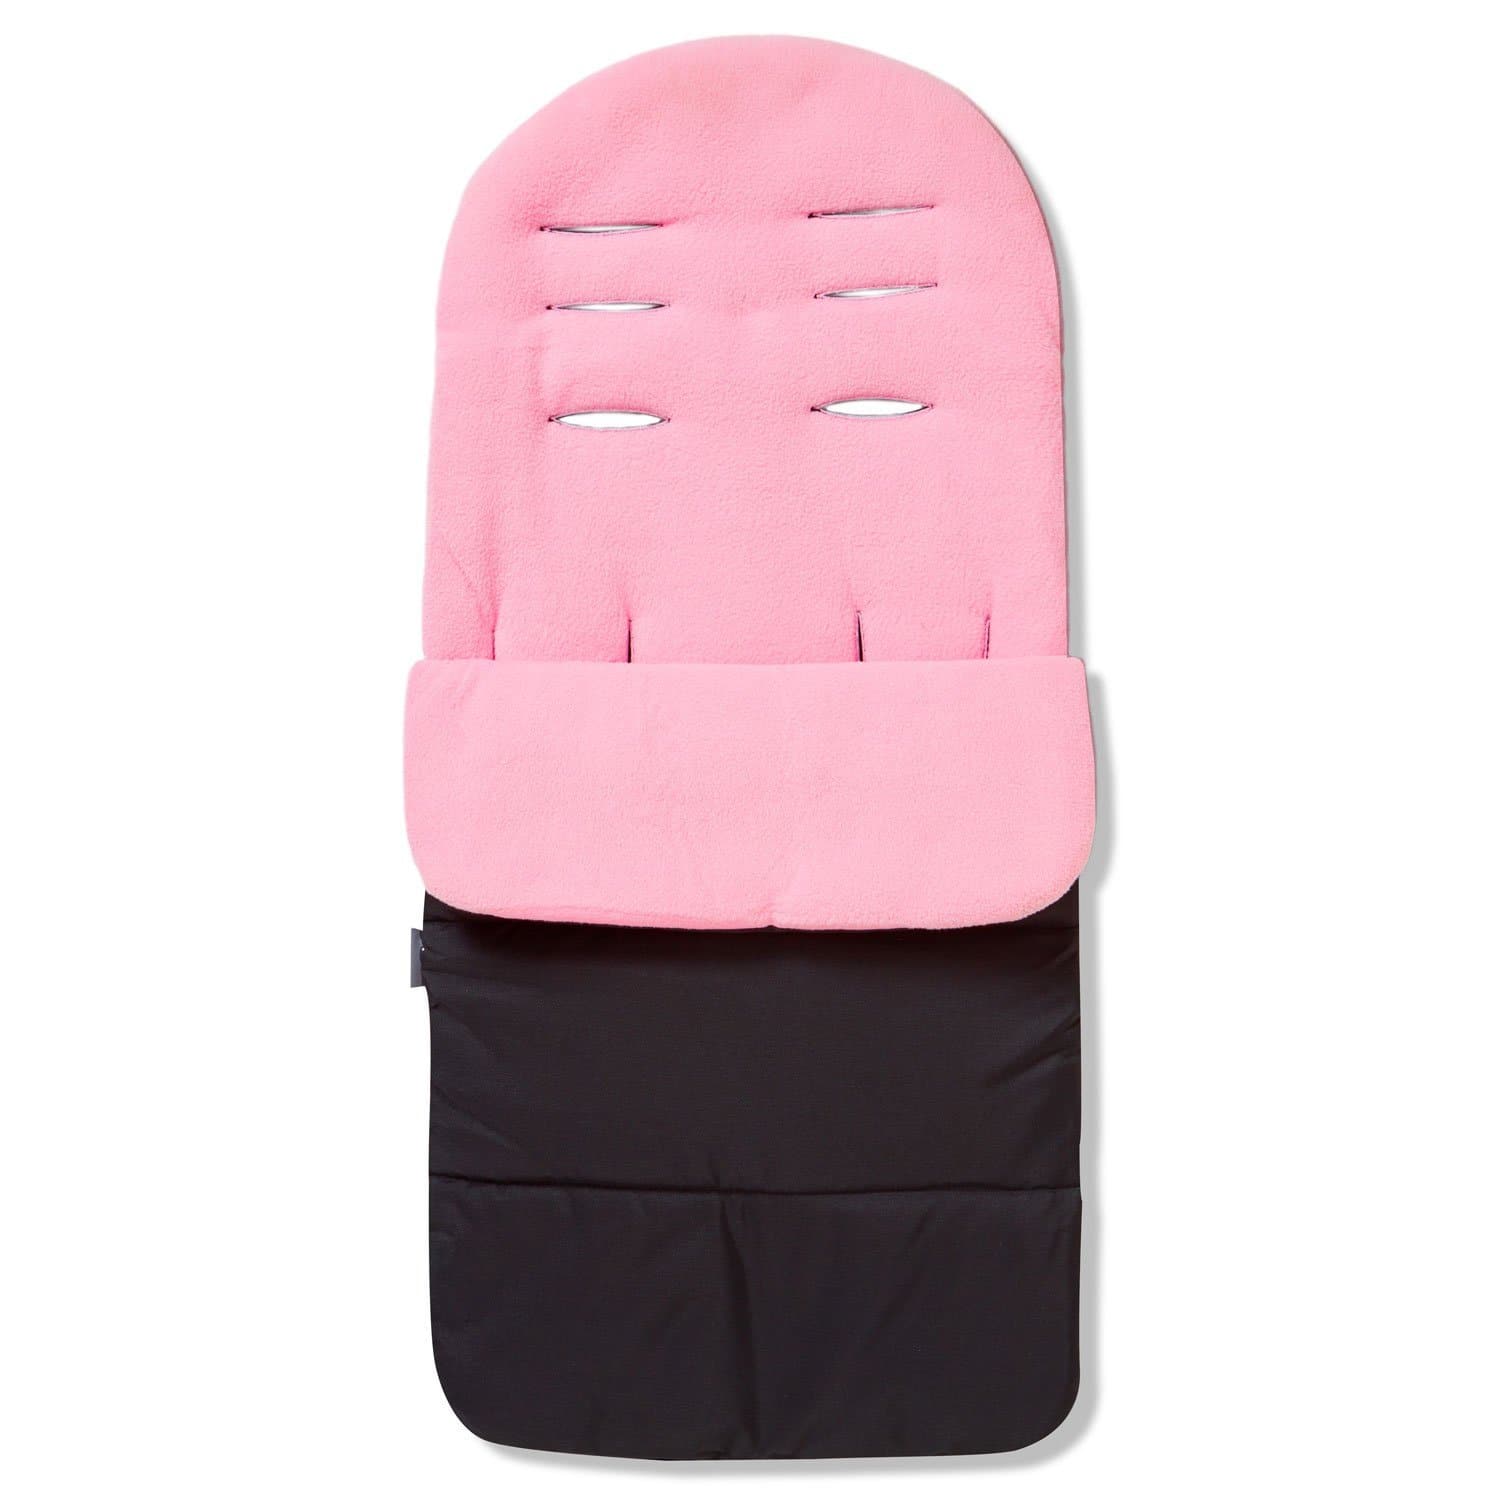 Premium Footmuff / Cosy Toes Compatible with Cosatto - Candy Pink / Fits All Models | For Your Little One